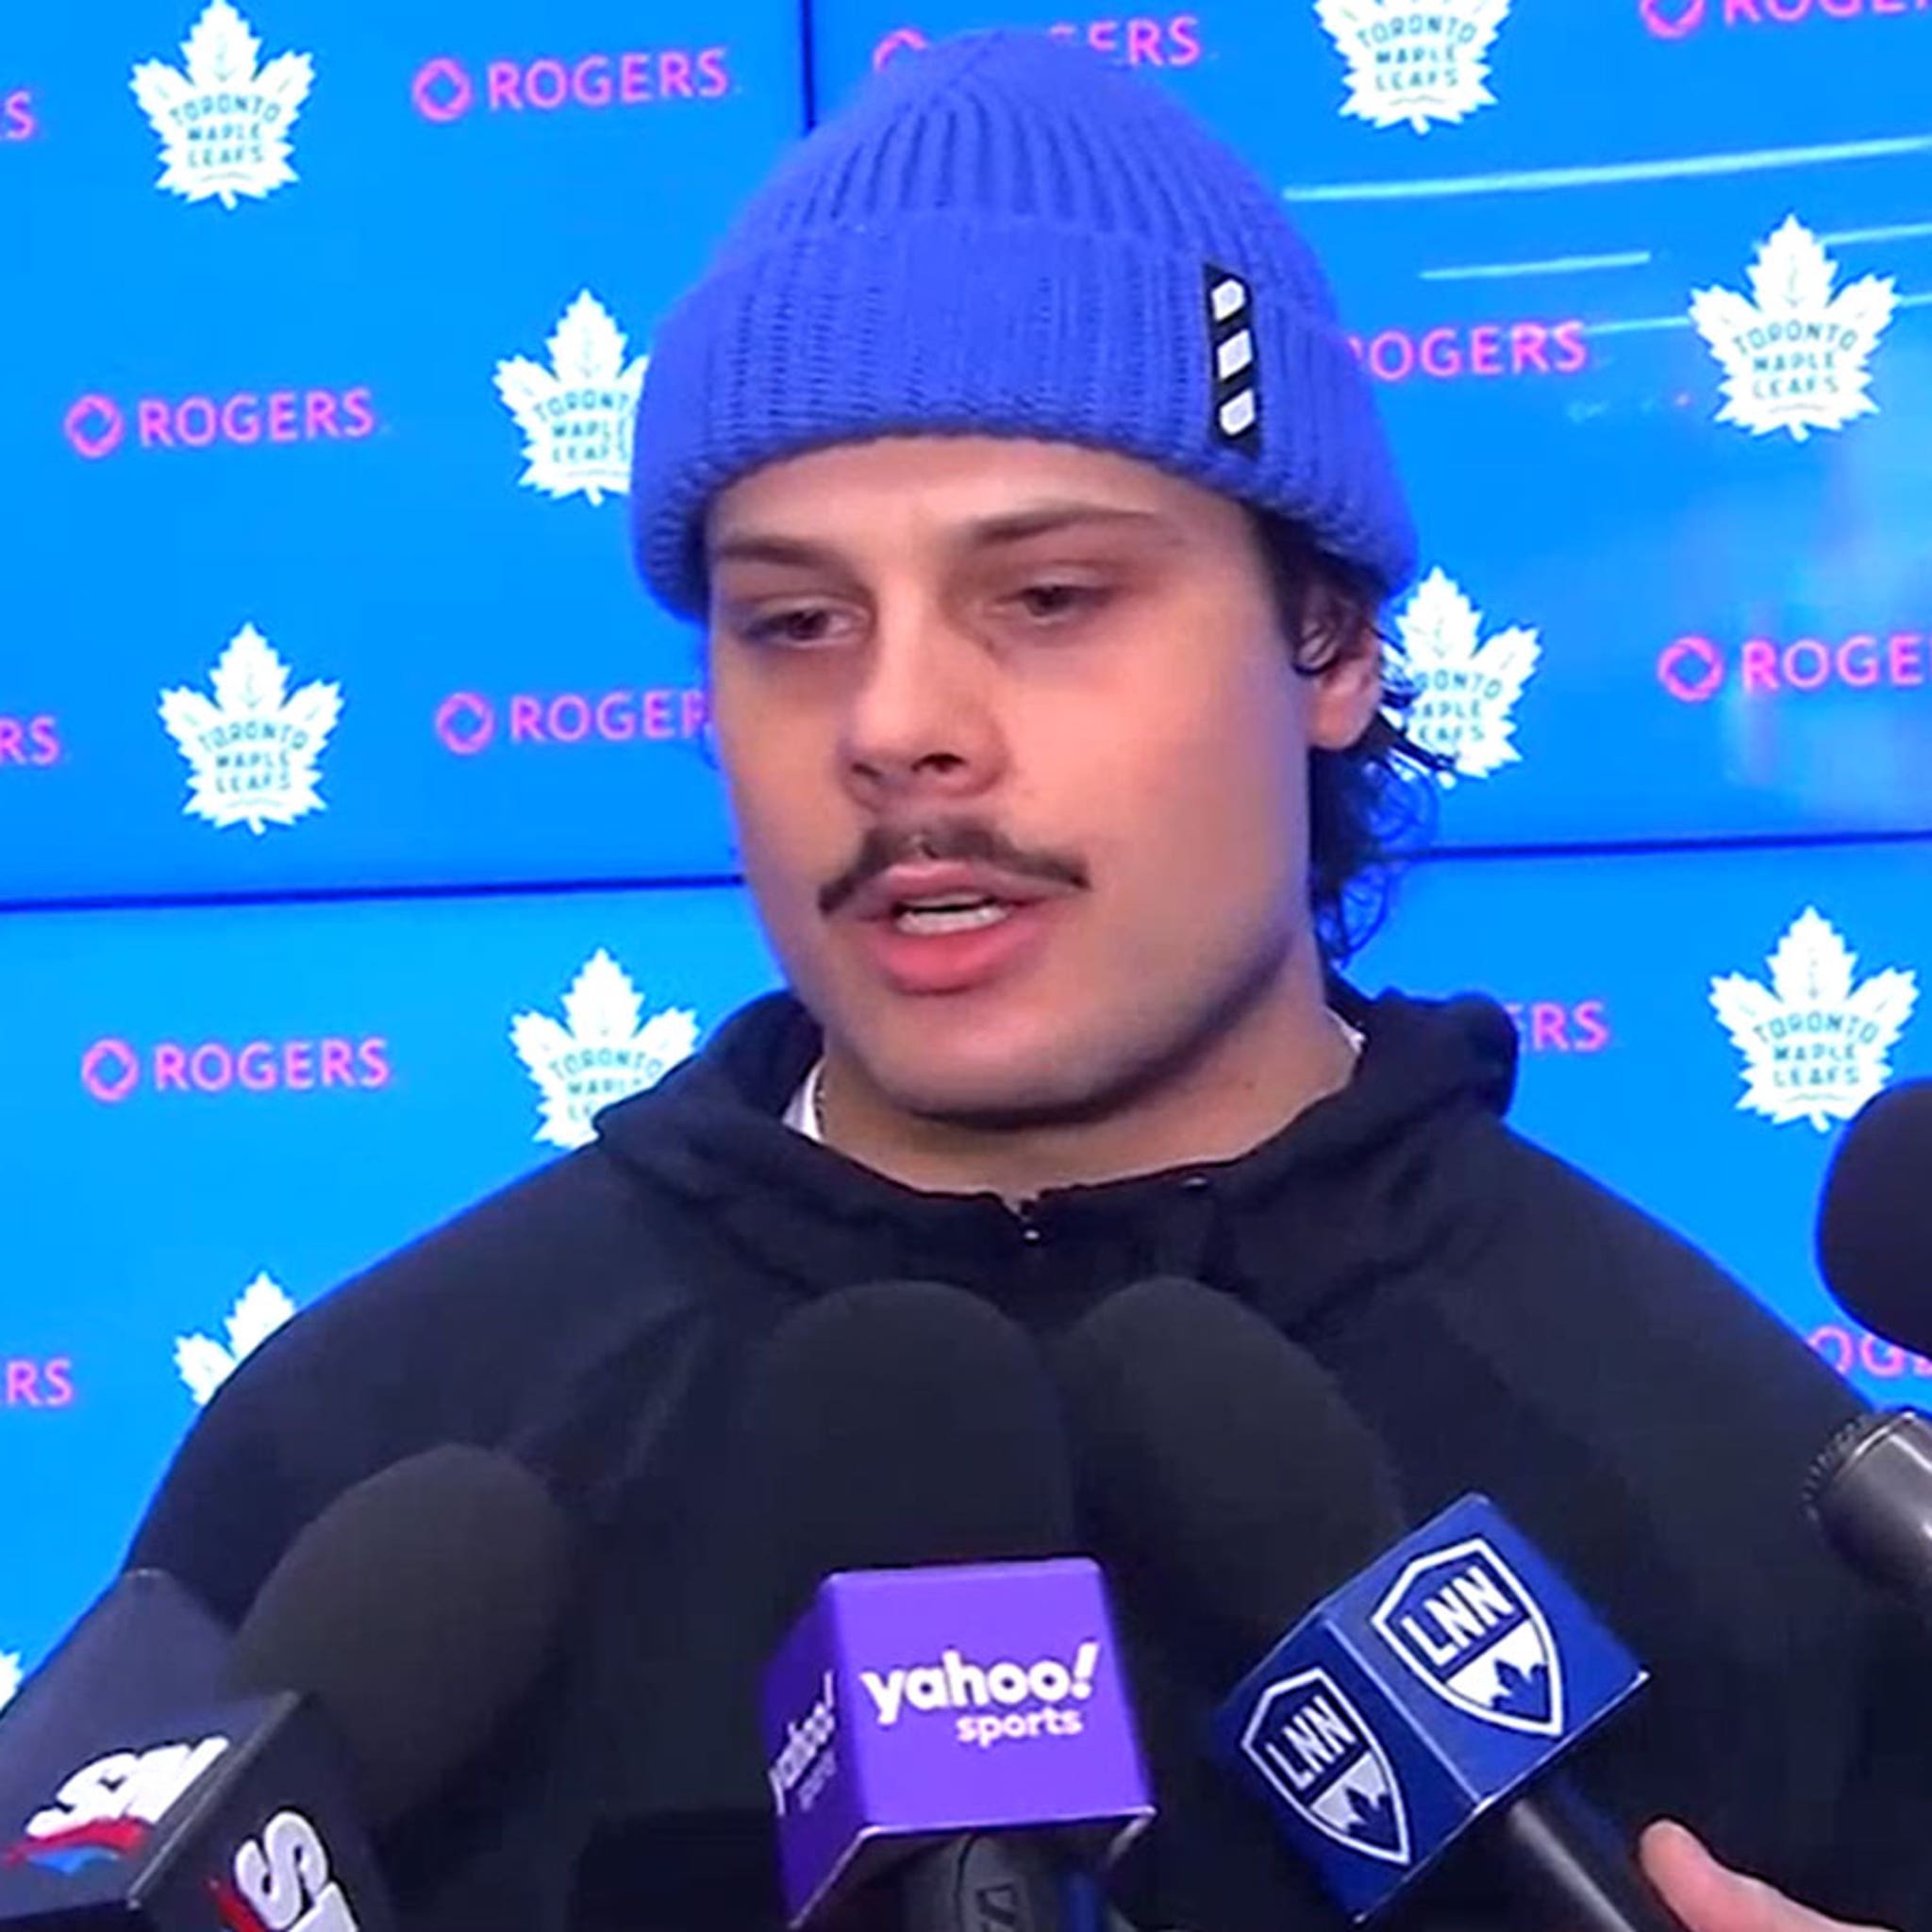 Leafs star Auston Matthews, charged with disorderly conduct and